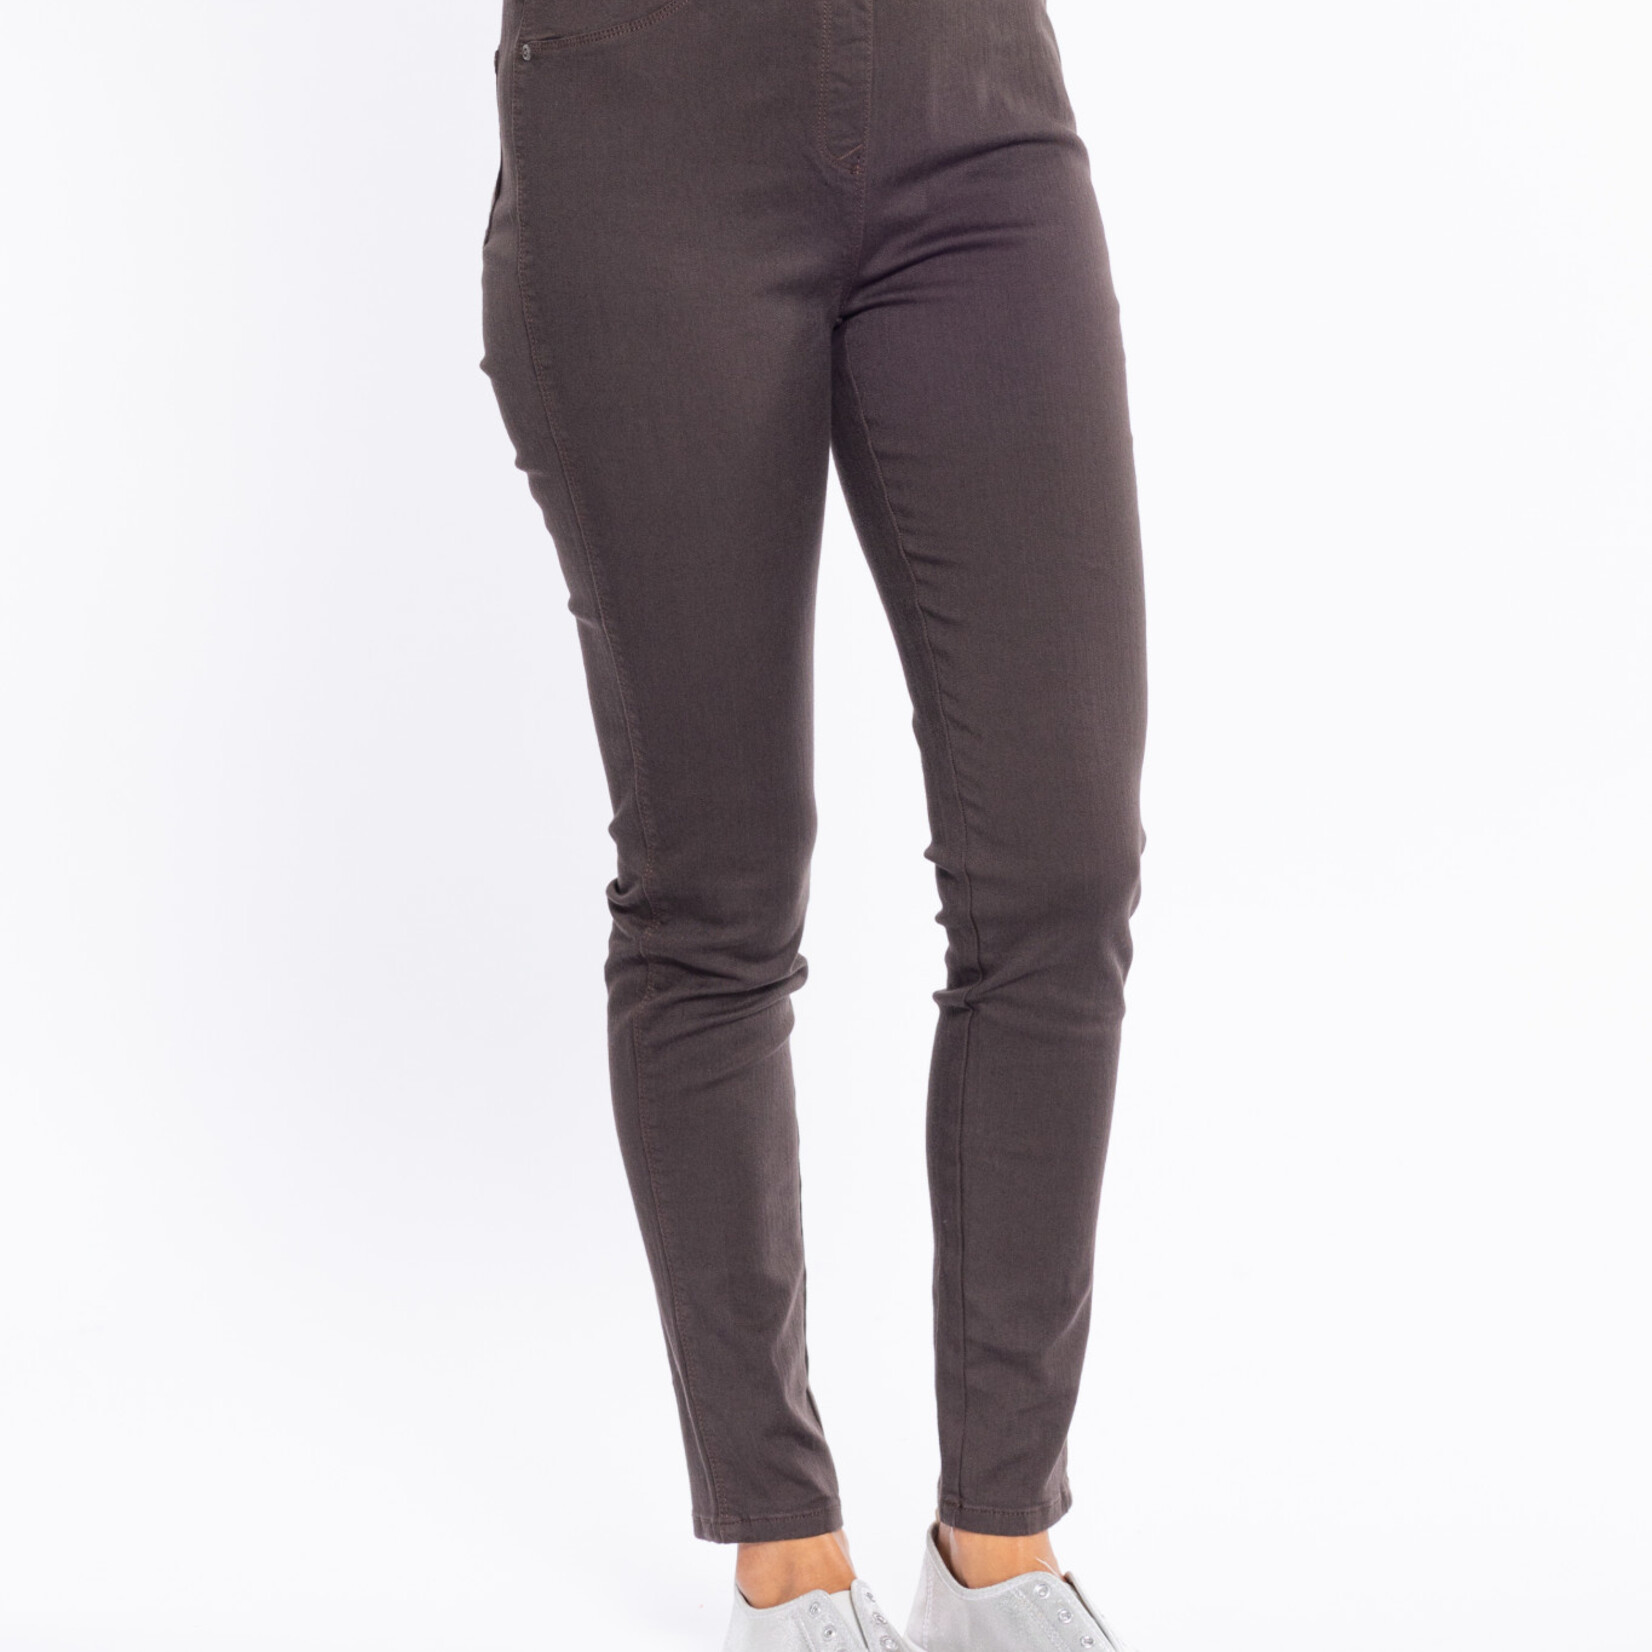 Cafe Latte Chocolate Cotton Fitted Leg Jeggings